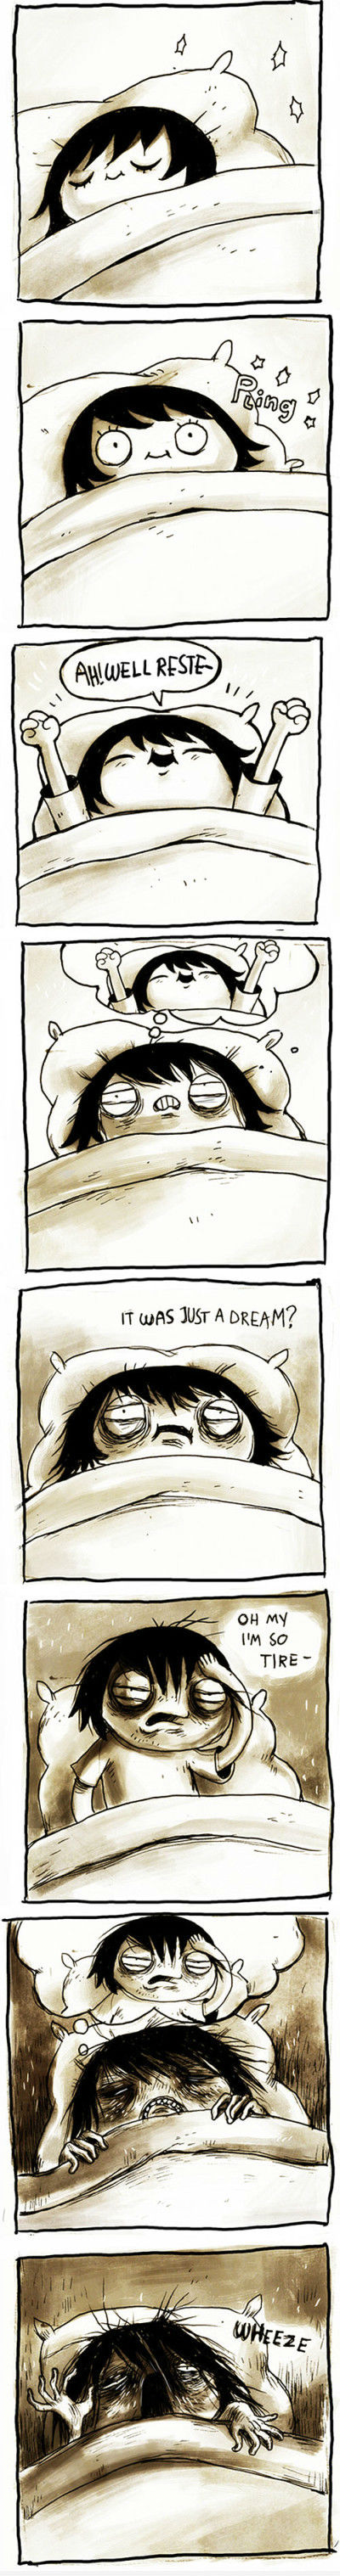 work meme - waking up comic - . Ping Ah!Well Reste It Was Just A Dream? Oh My I'M So Tire Wheeze